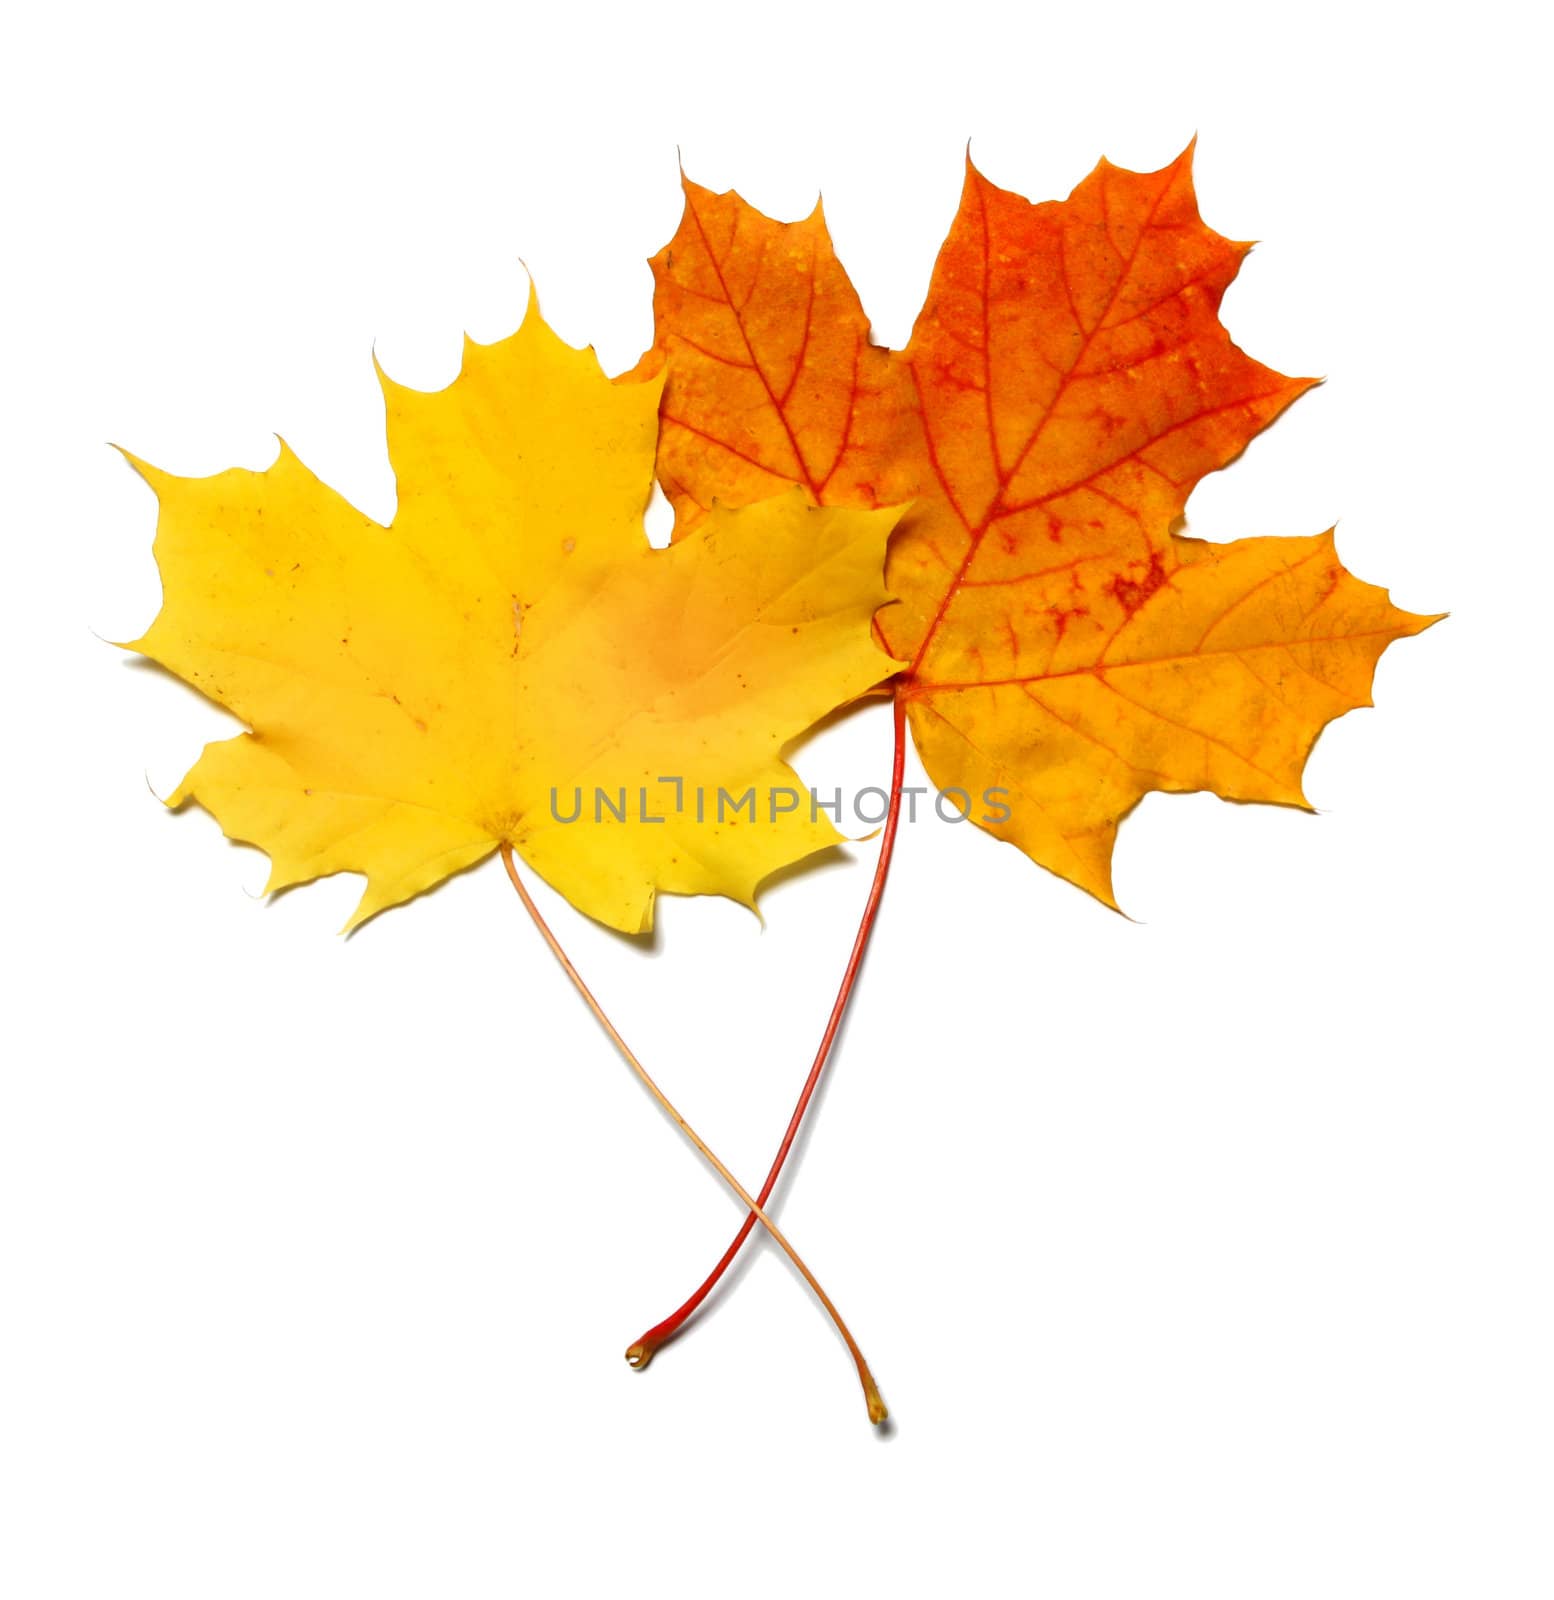 Yellow and red orange maplea leafs isolated on white background